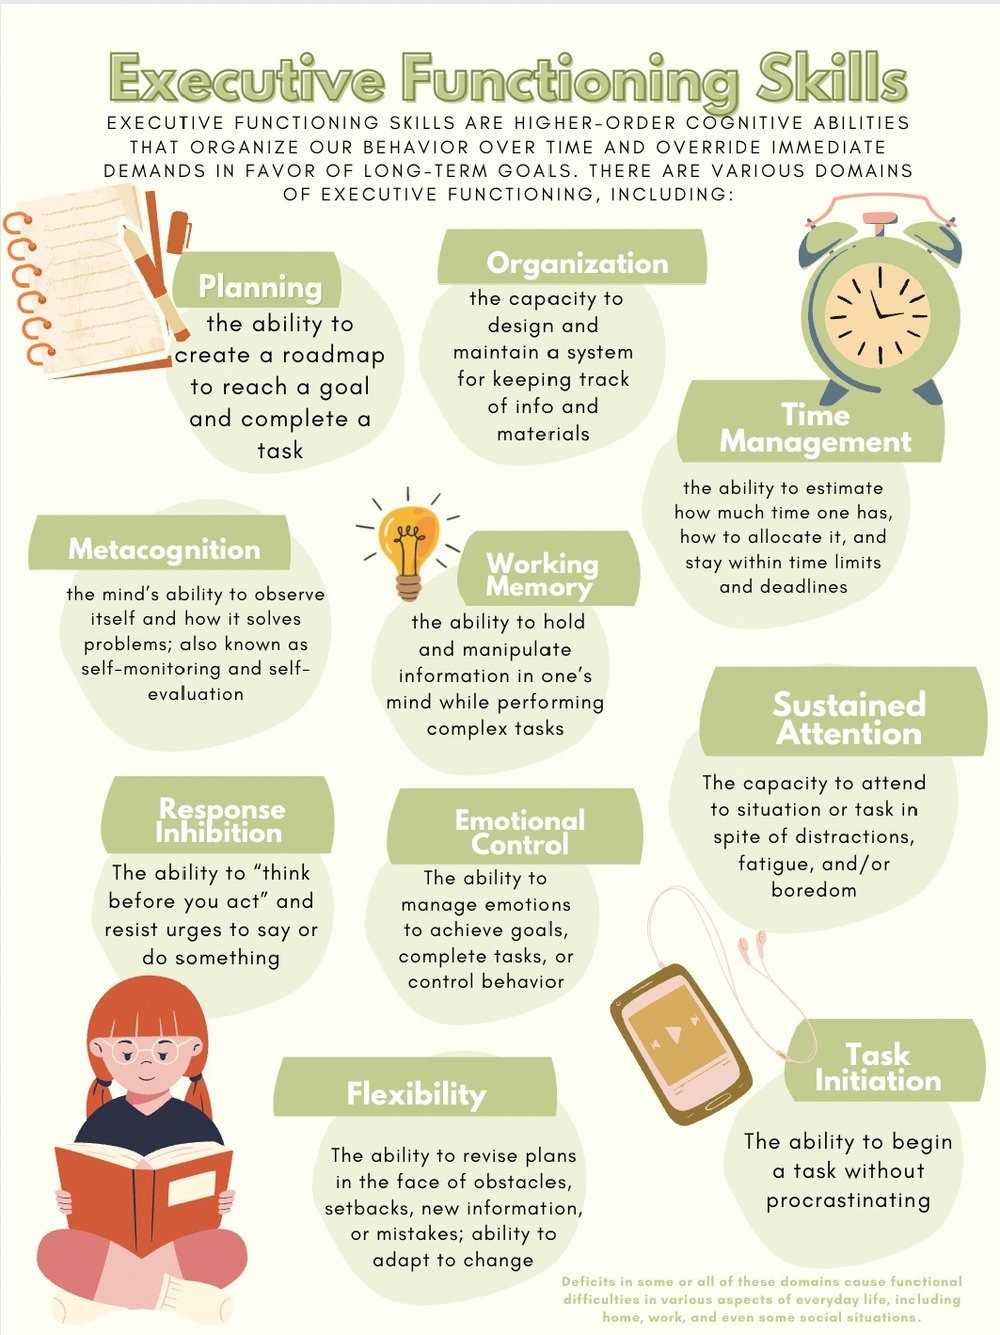 Executive Functioning Coaching | Heights Psychology Collective